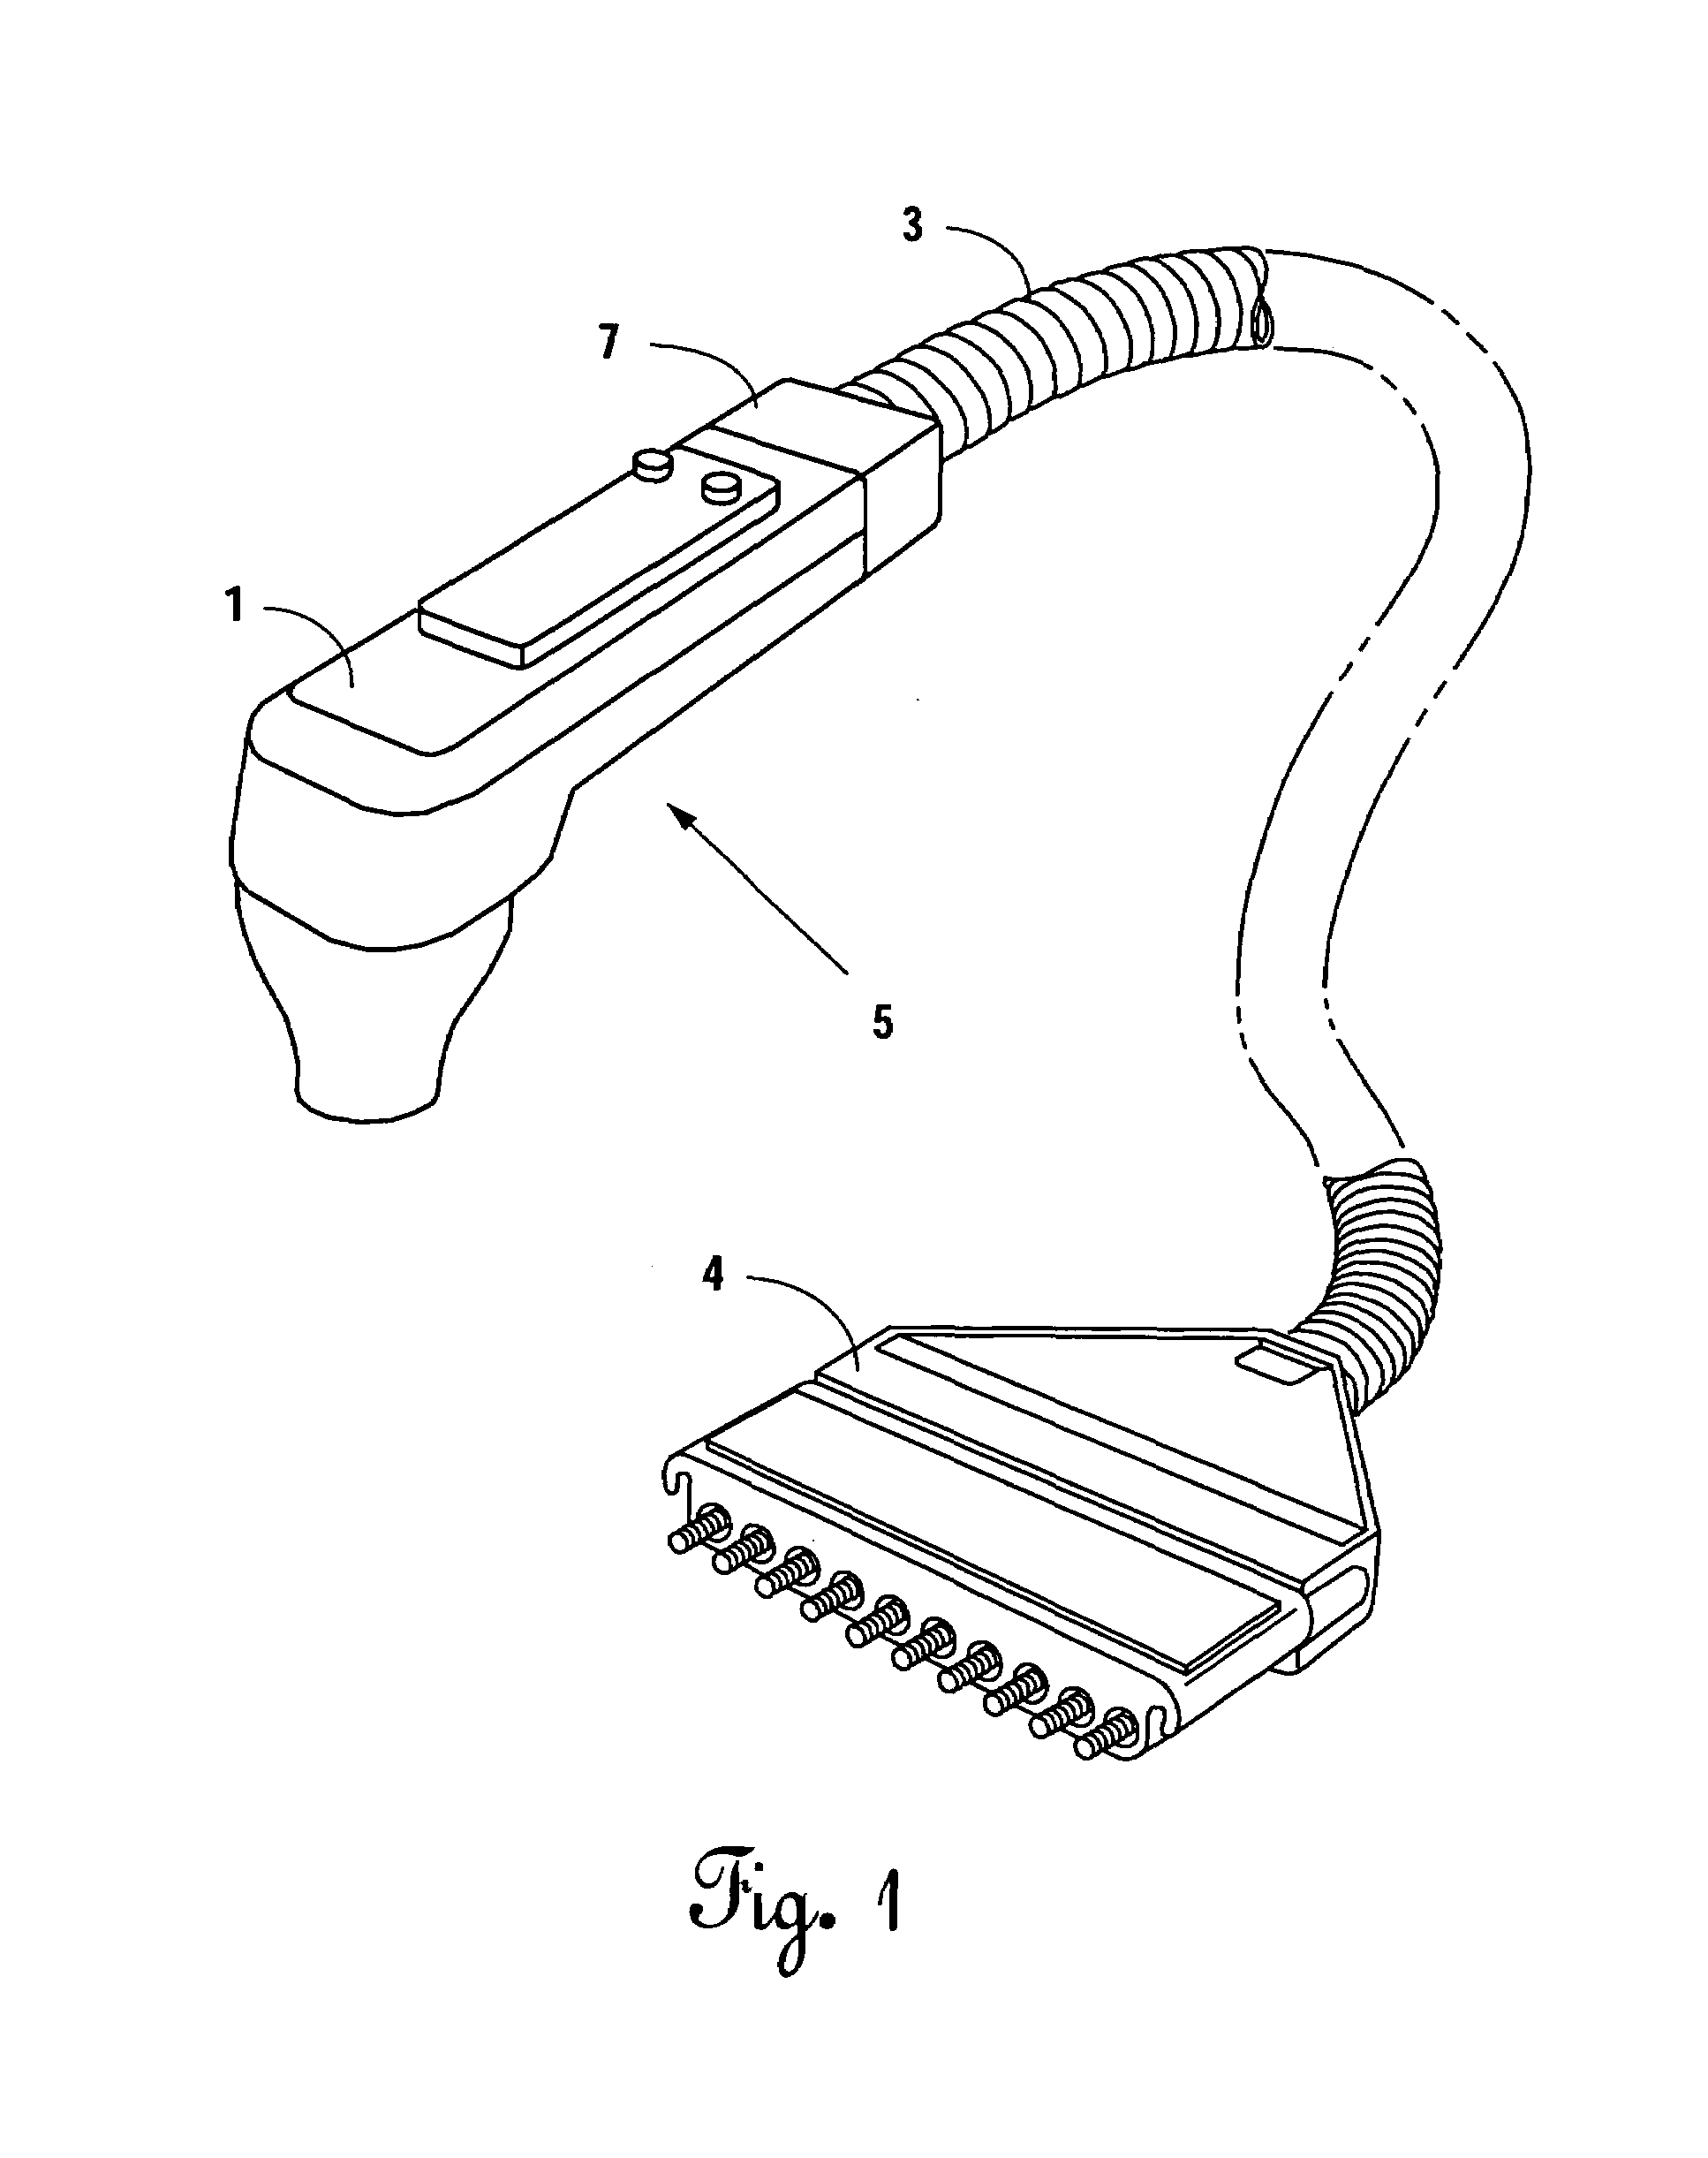 Method of manufacturing a handle for a beverage dispensing head